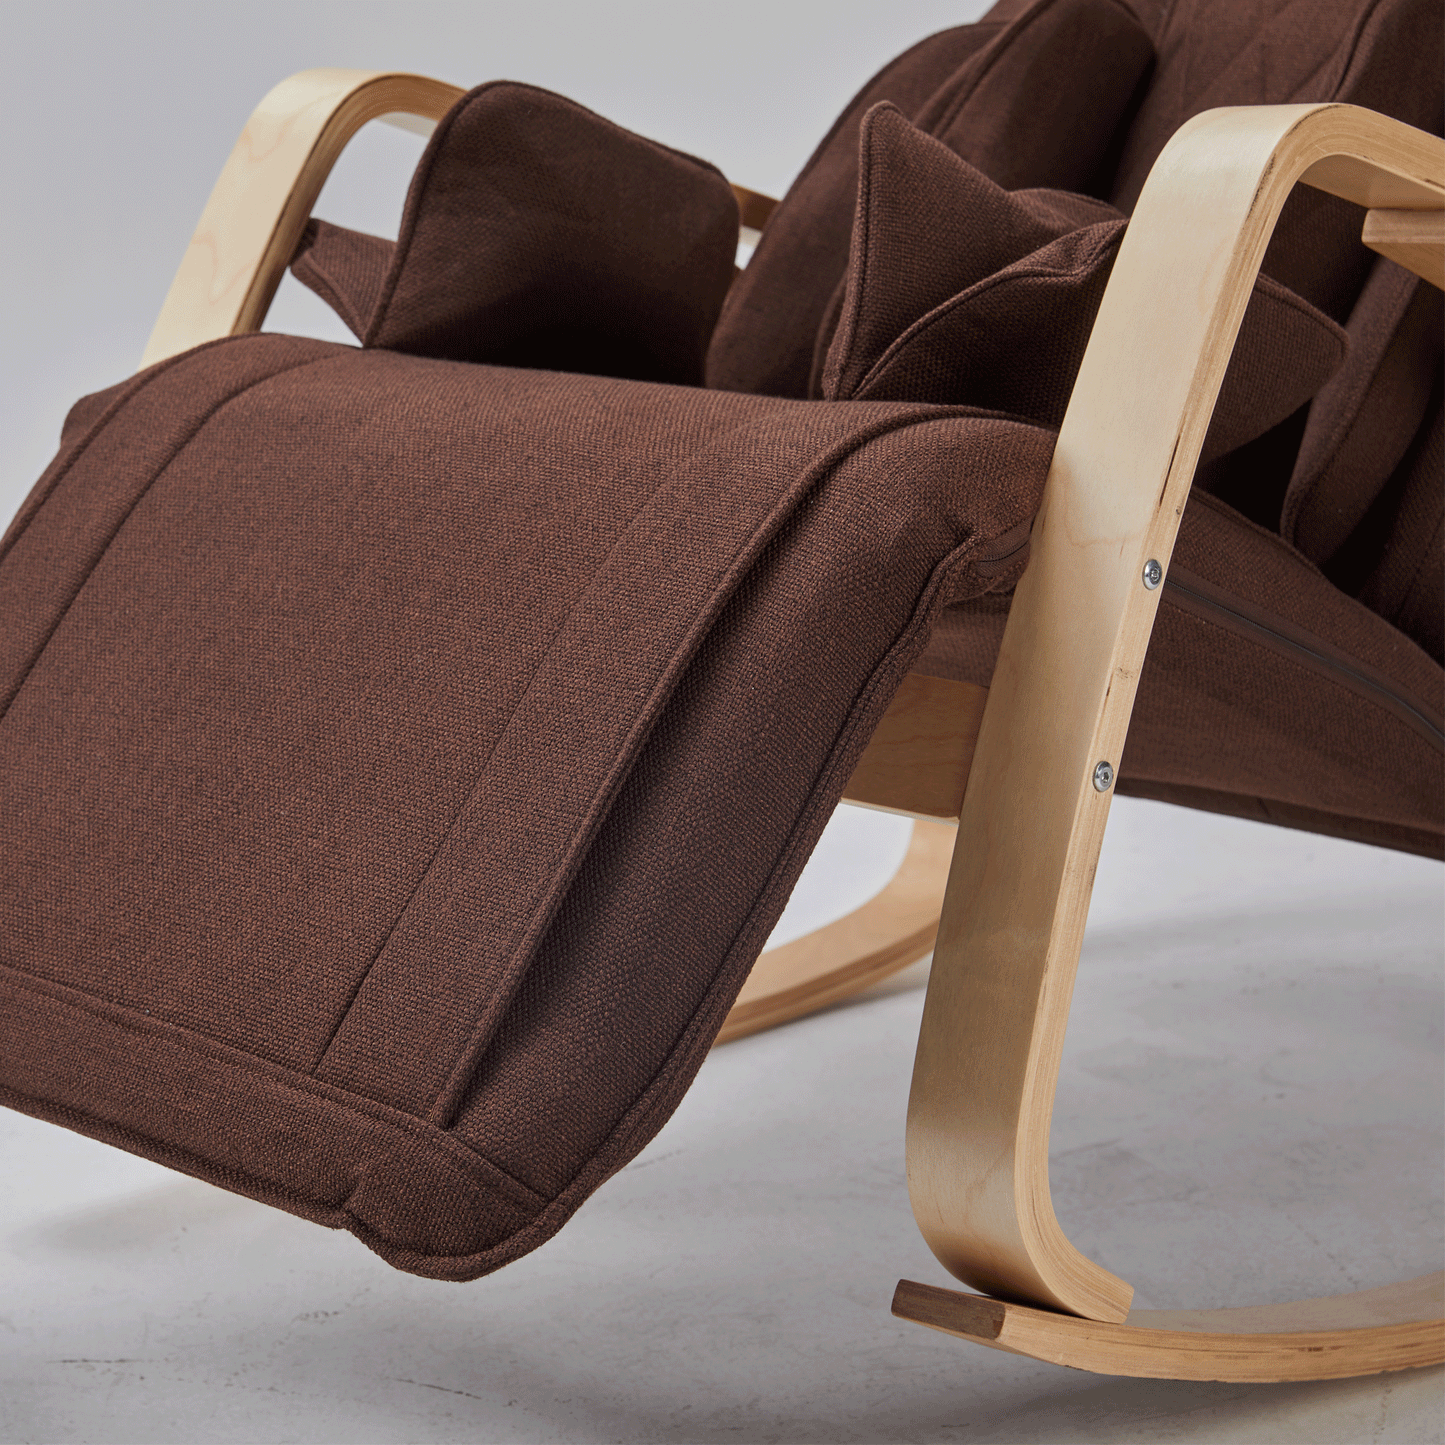 Comtable Relax Rocking Chair, Lounge Chair Relax Chair with Cotton Fabric Cushion  Brown